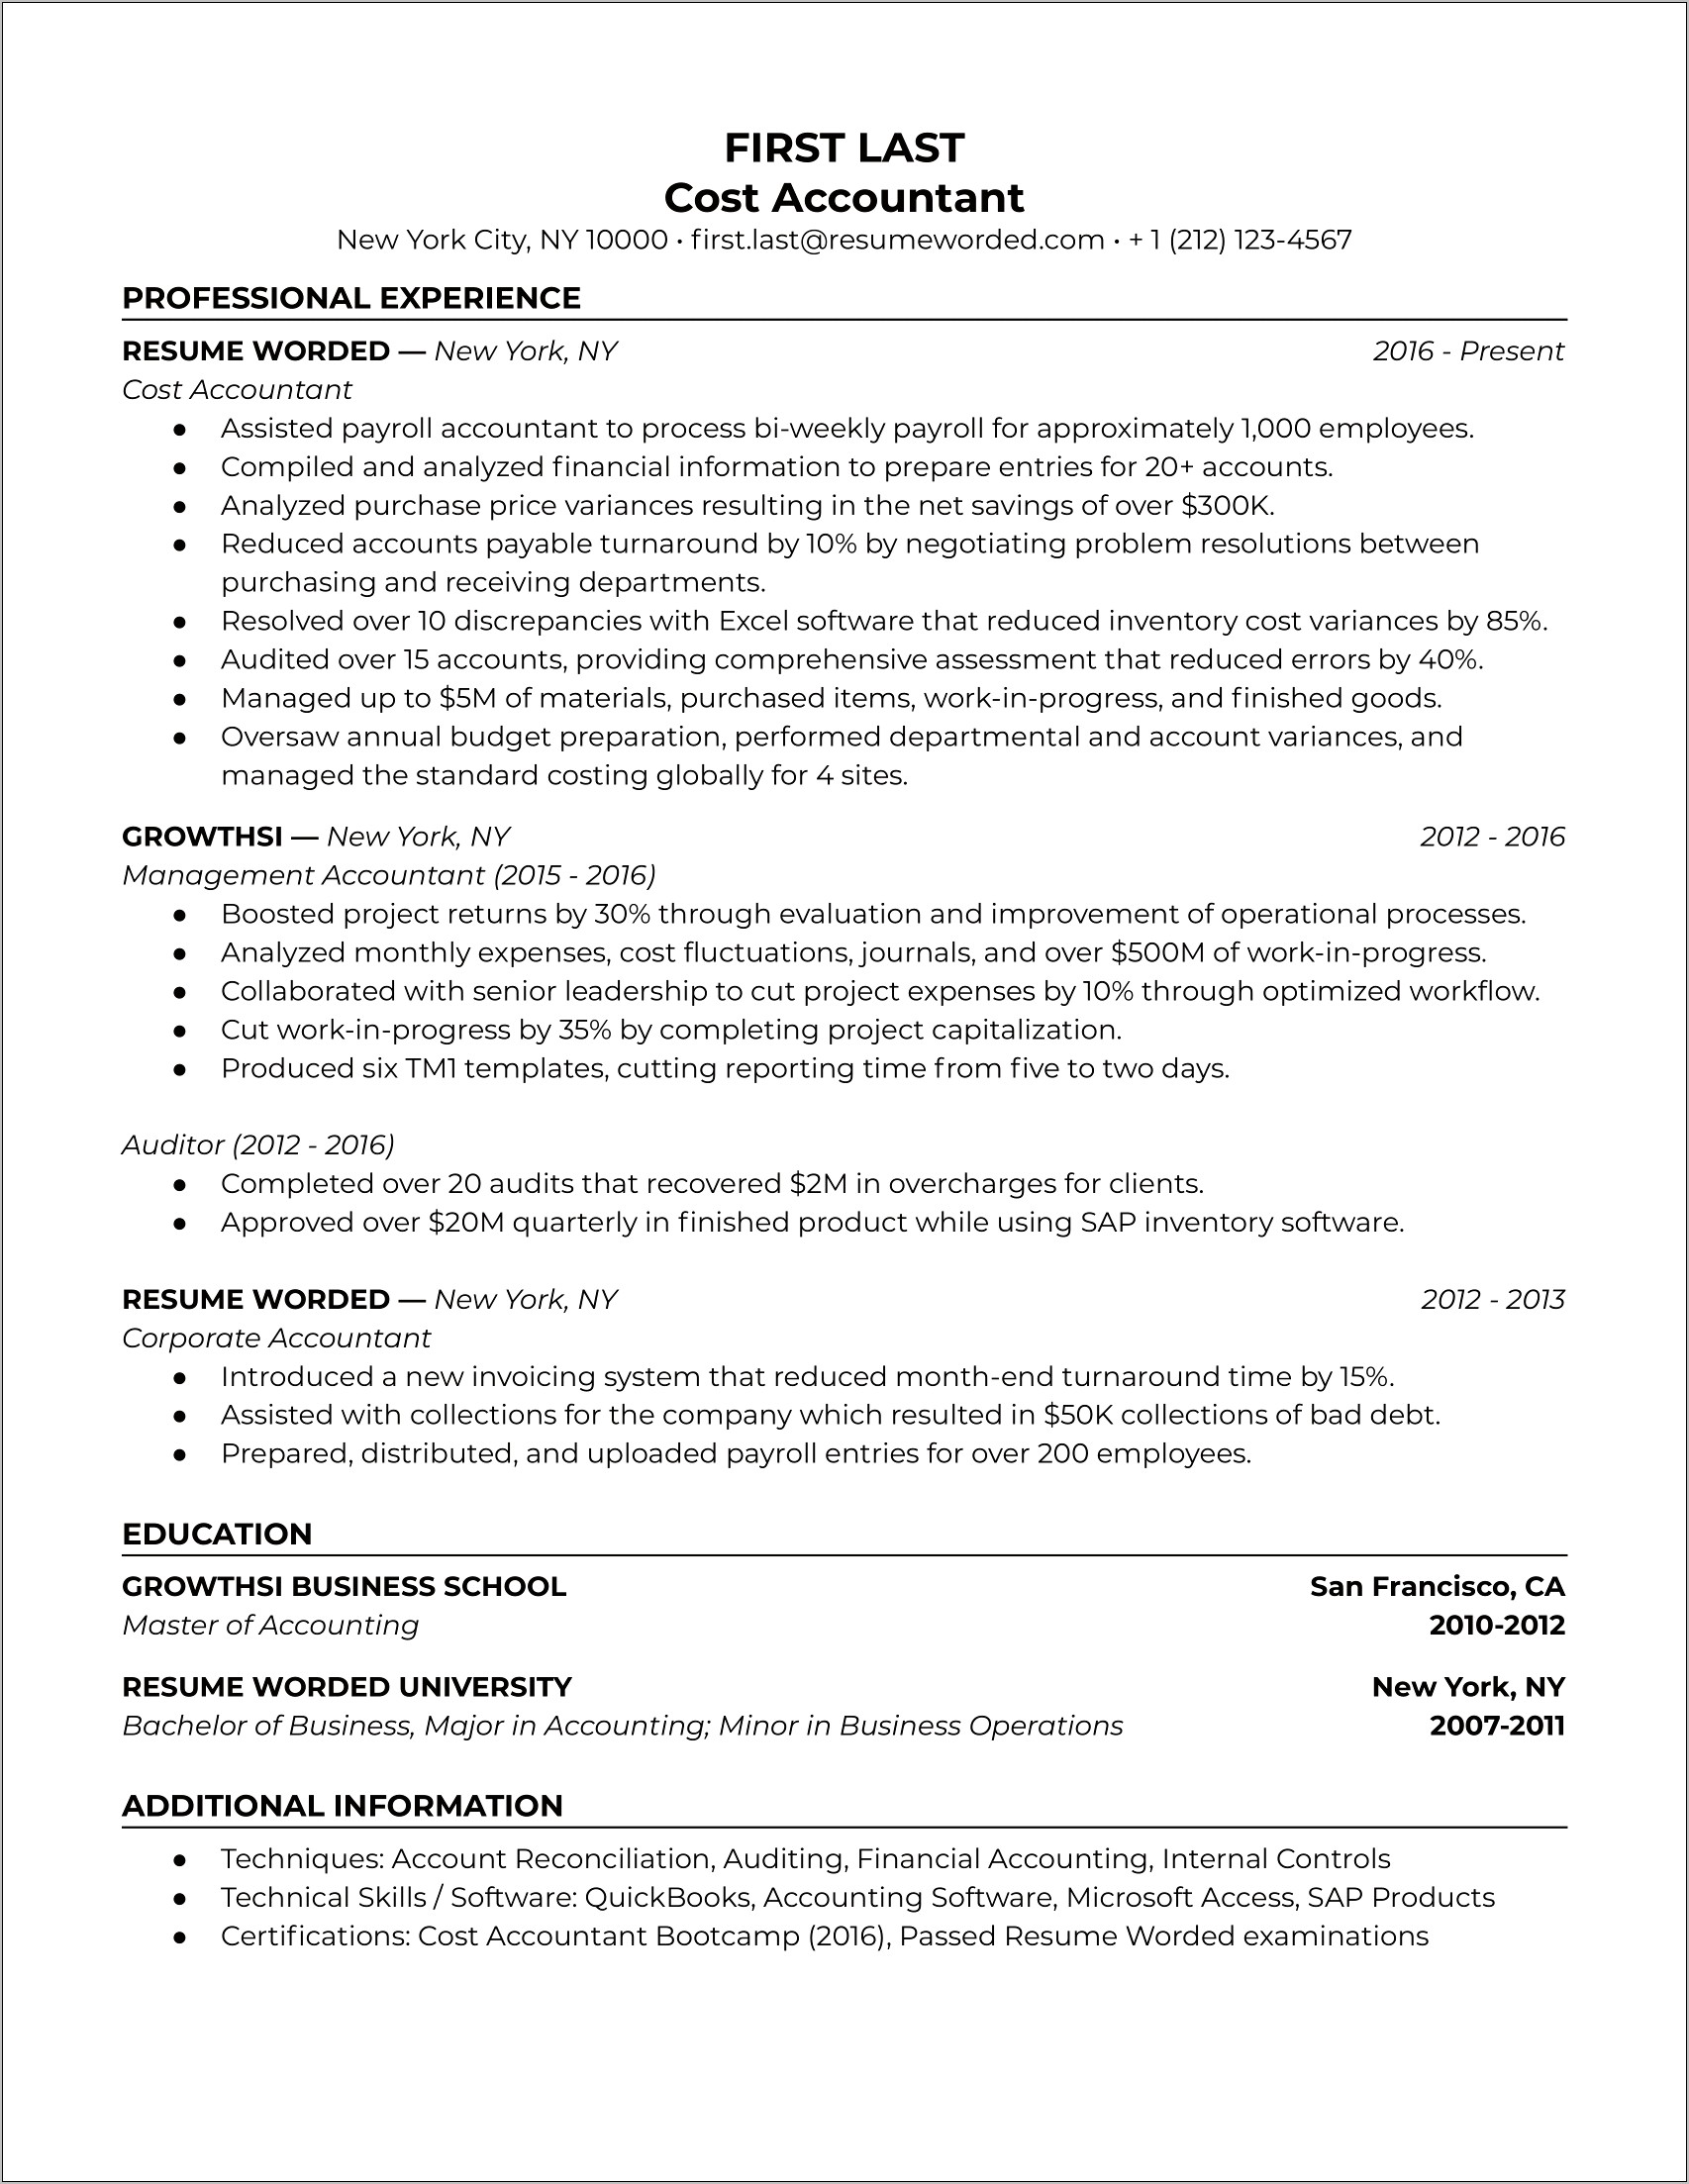 Sample Resume For Accounting Position With No Experience